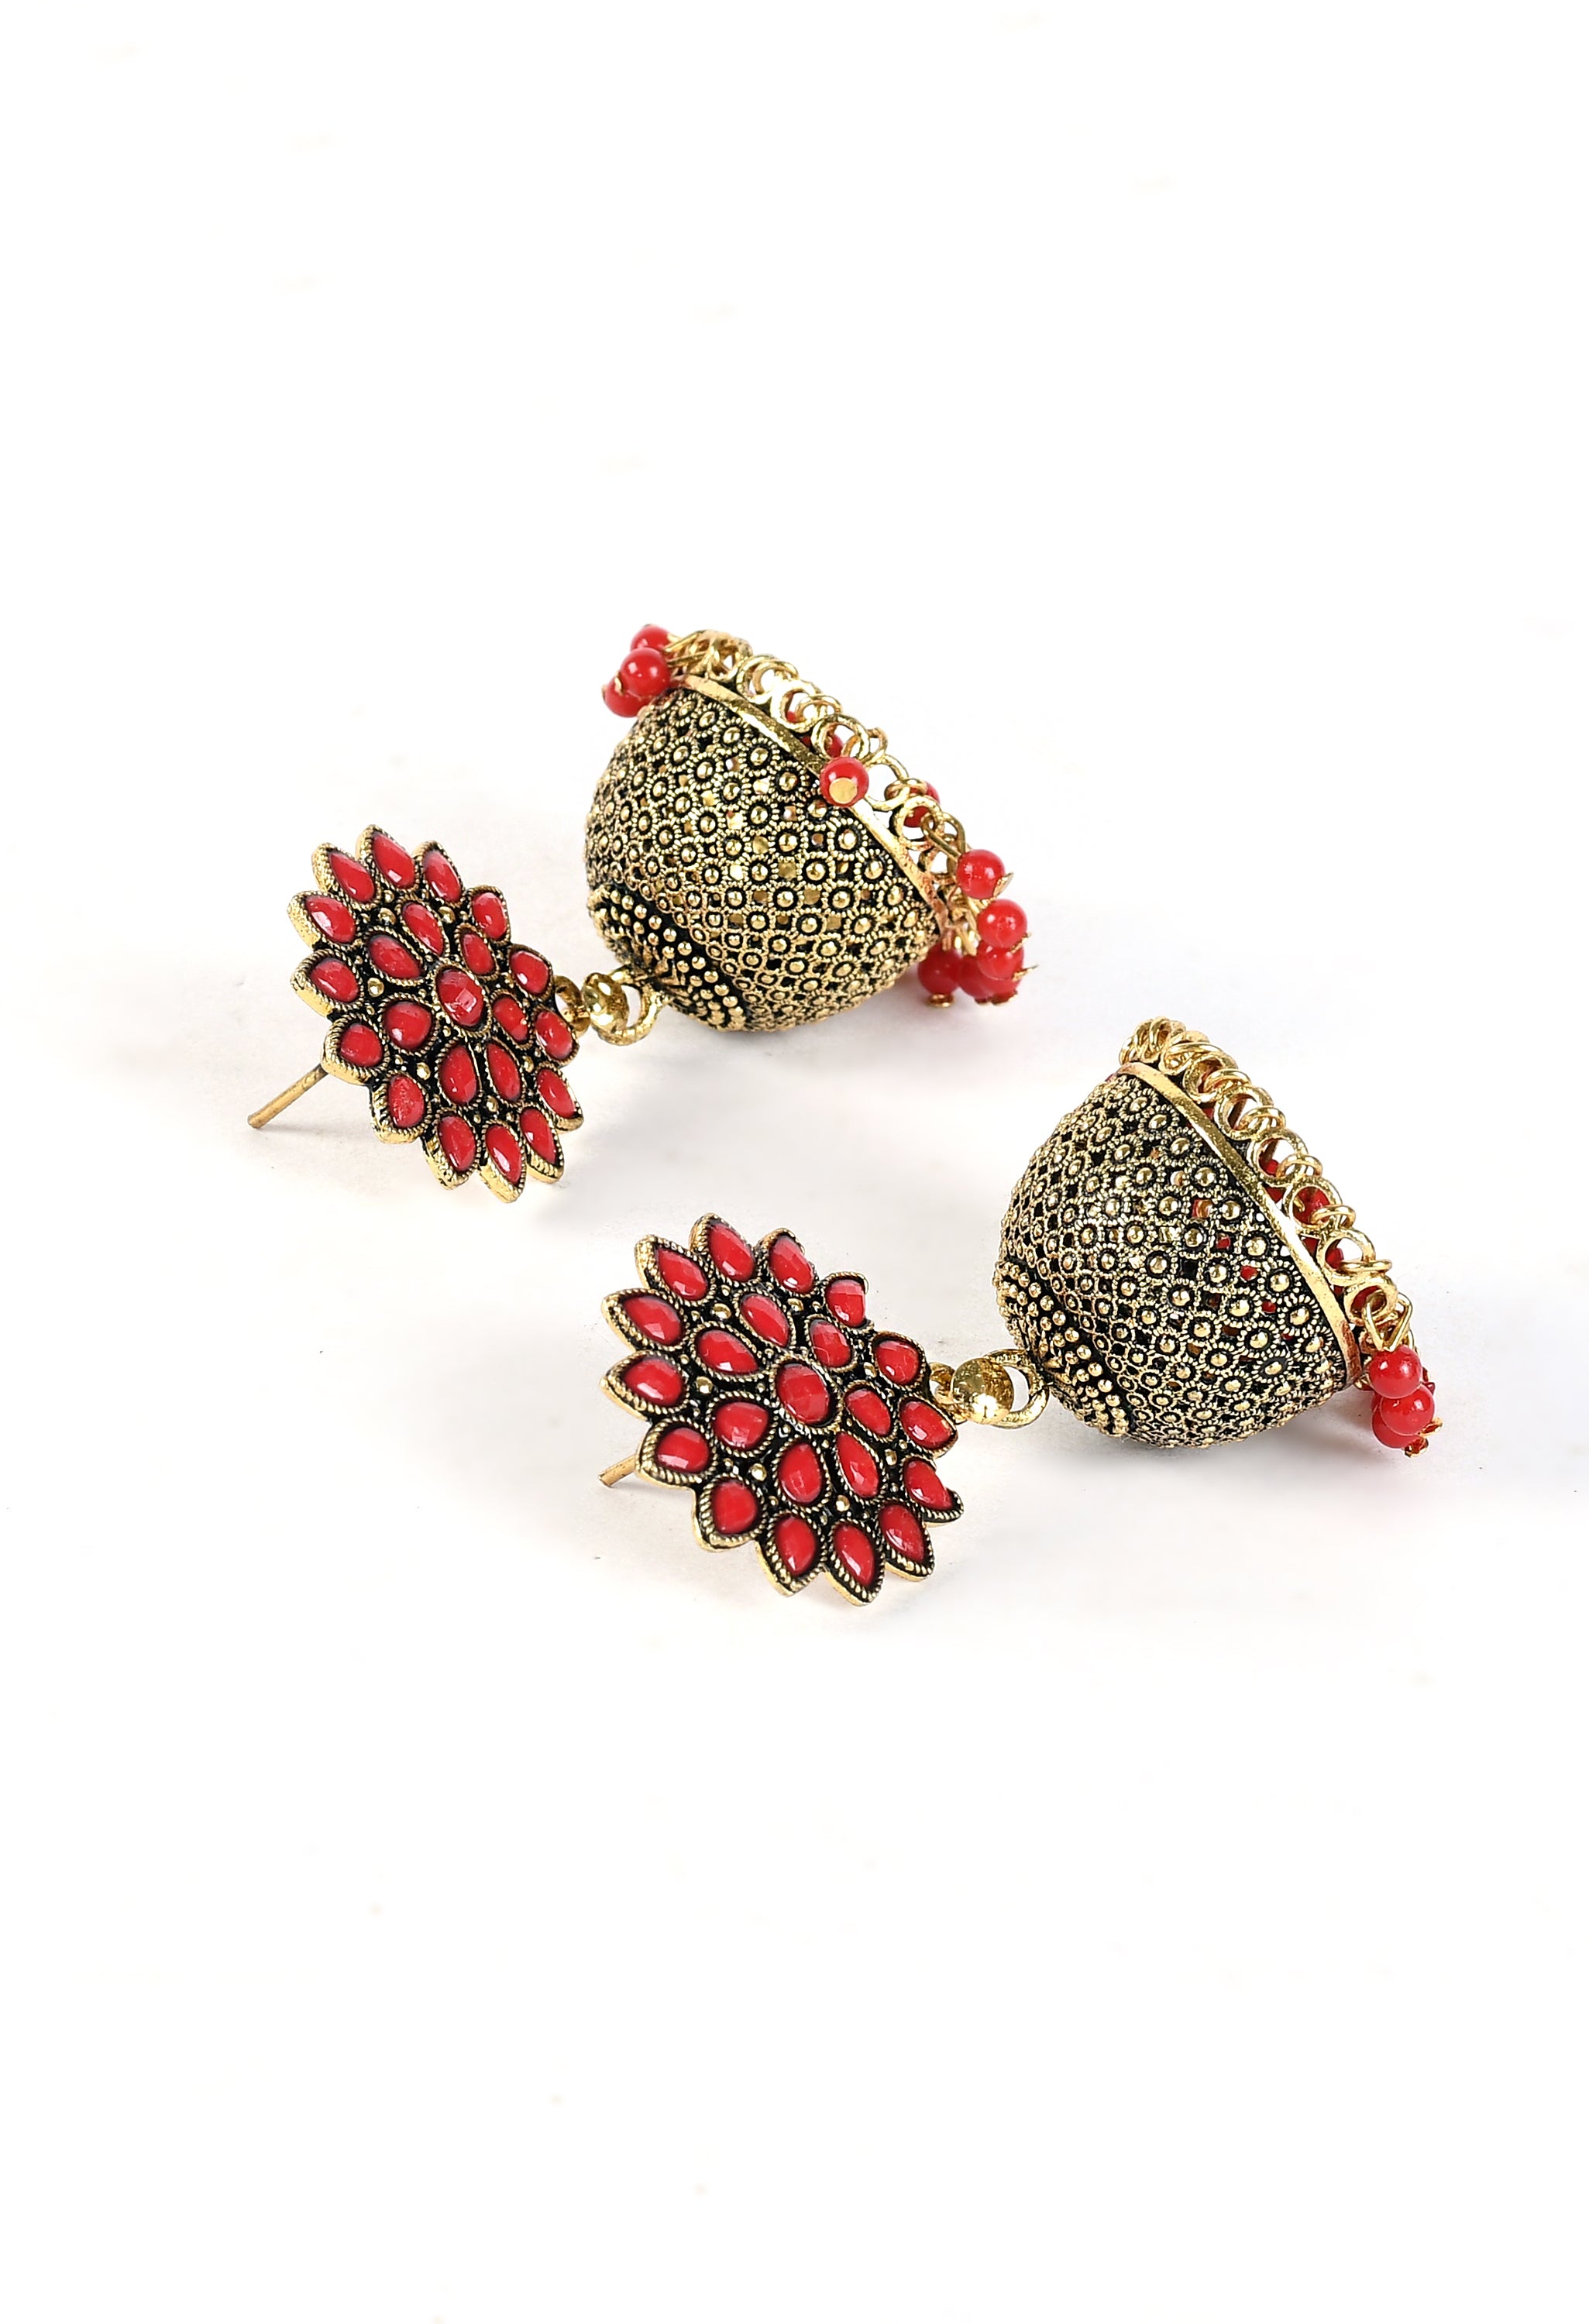 Women's Golden Colour Earrings With Red Pearl - Tehzeeb